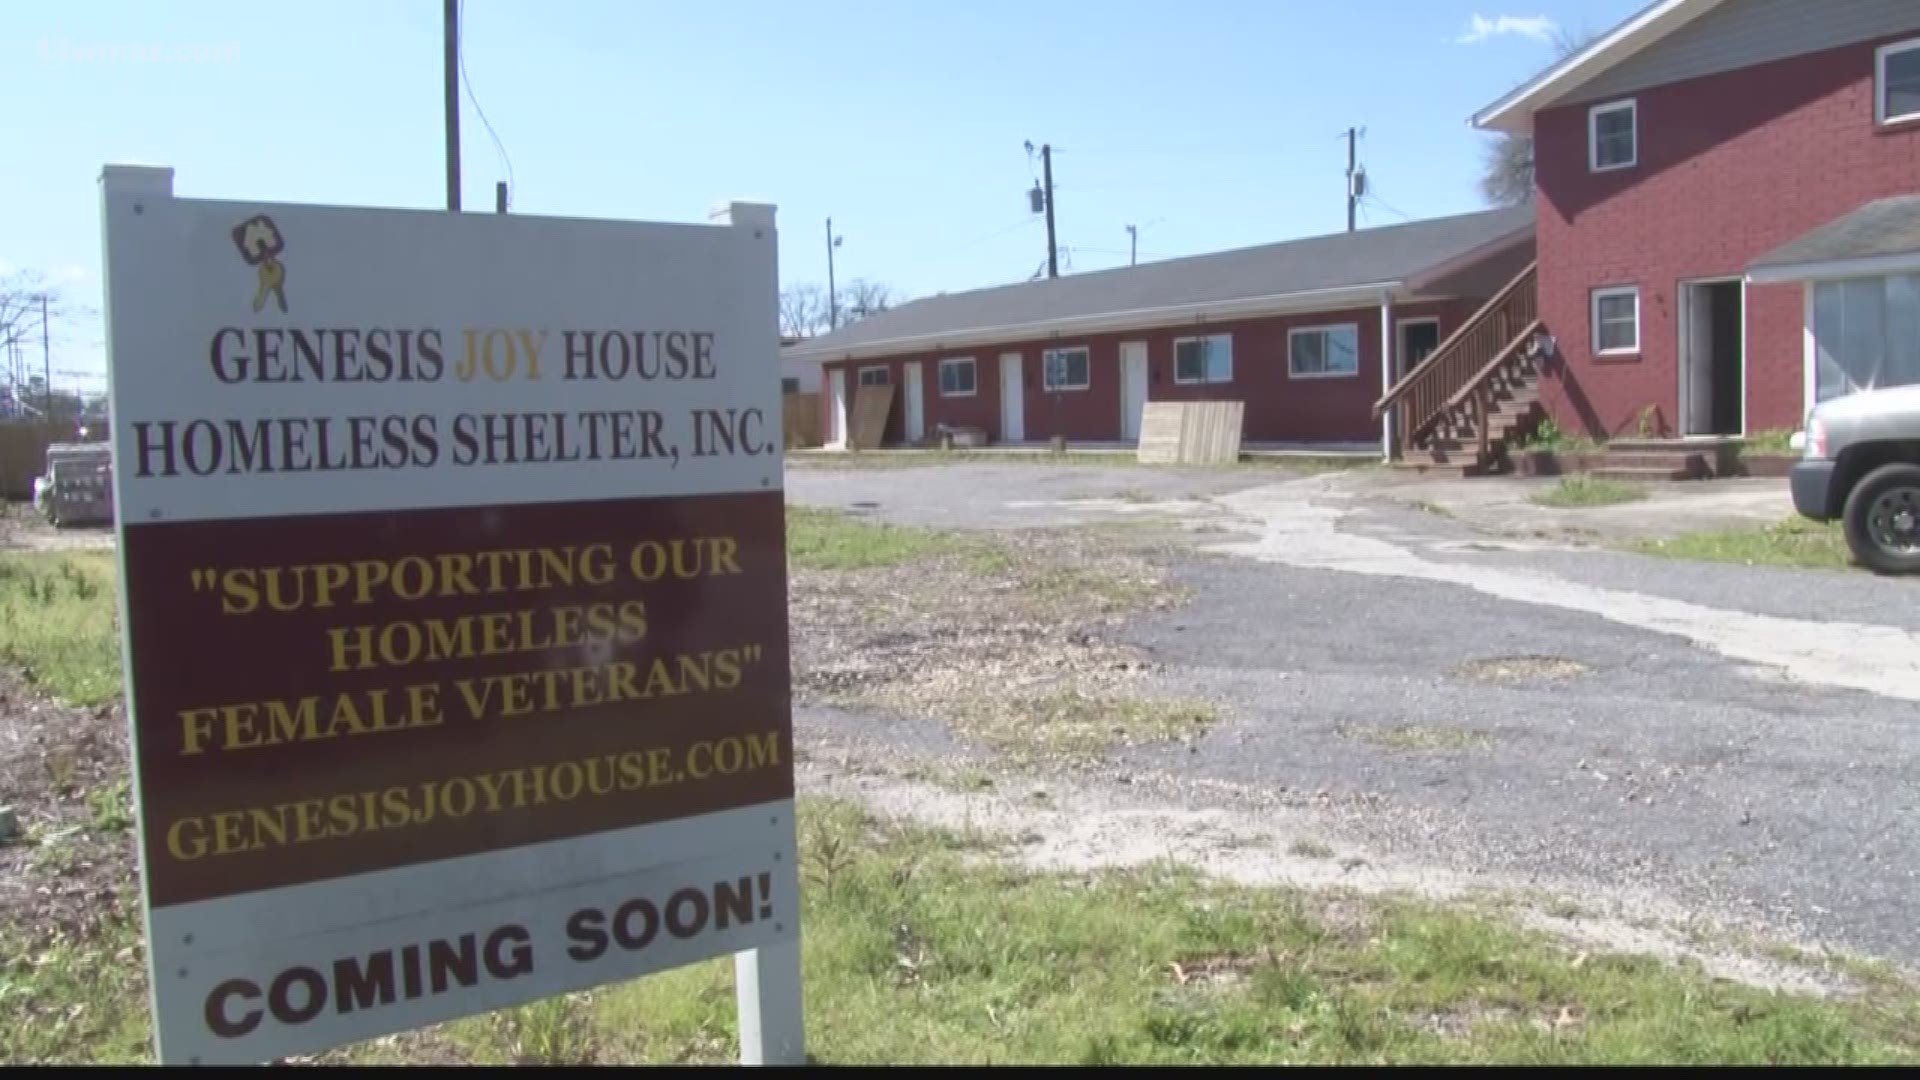 The non-profit is aiming to provide transitional housing and enrichment programs to homeless female veterans.